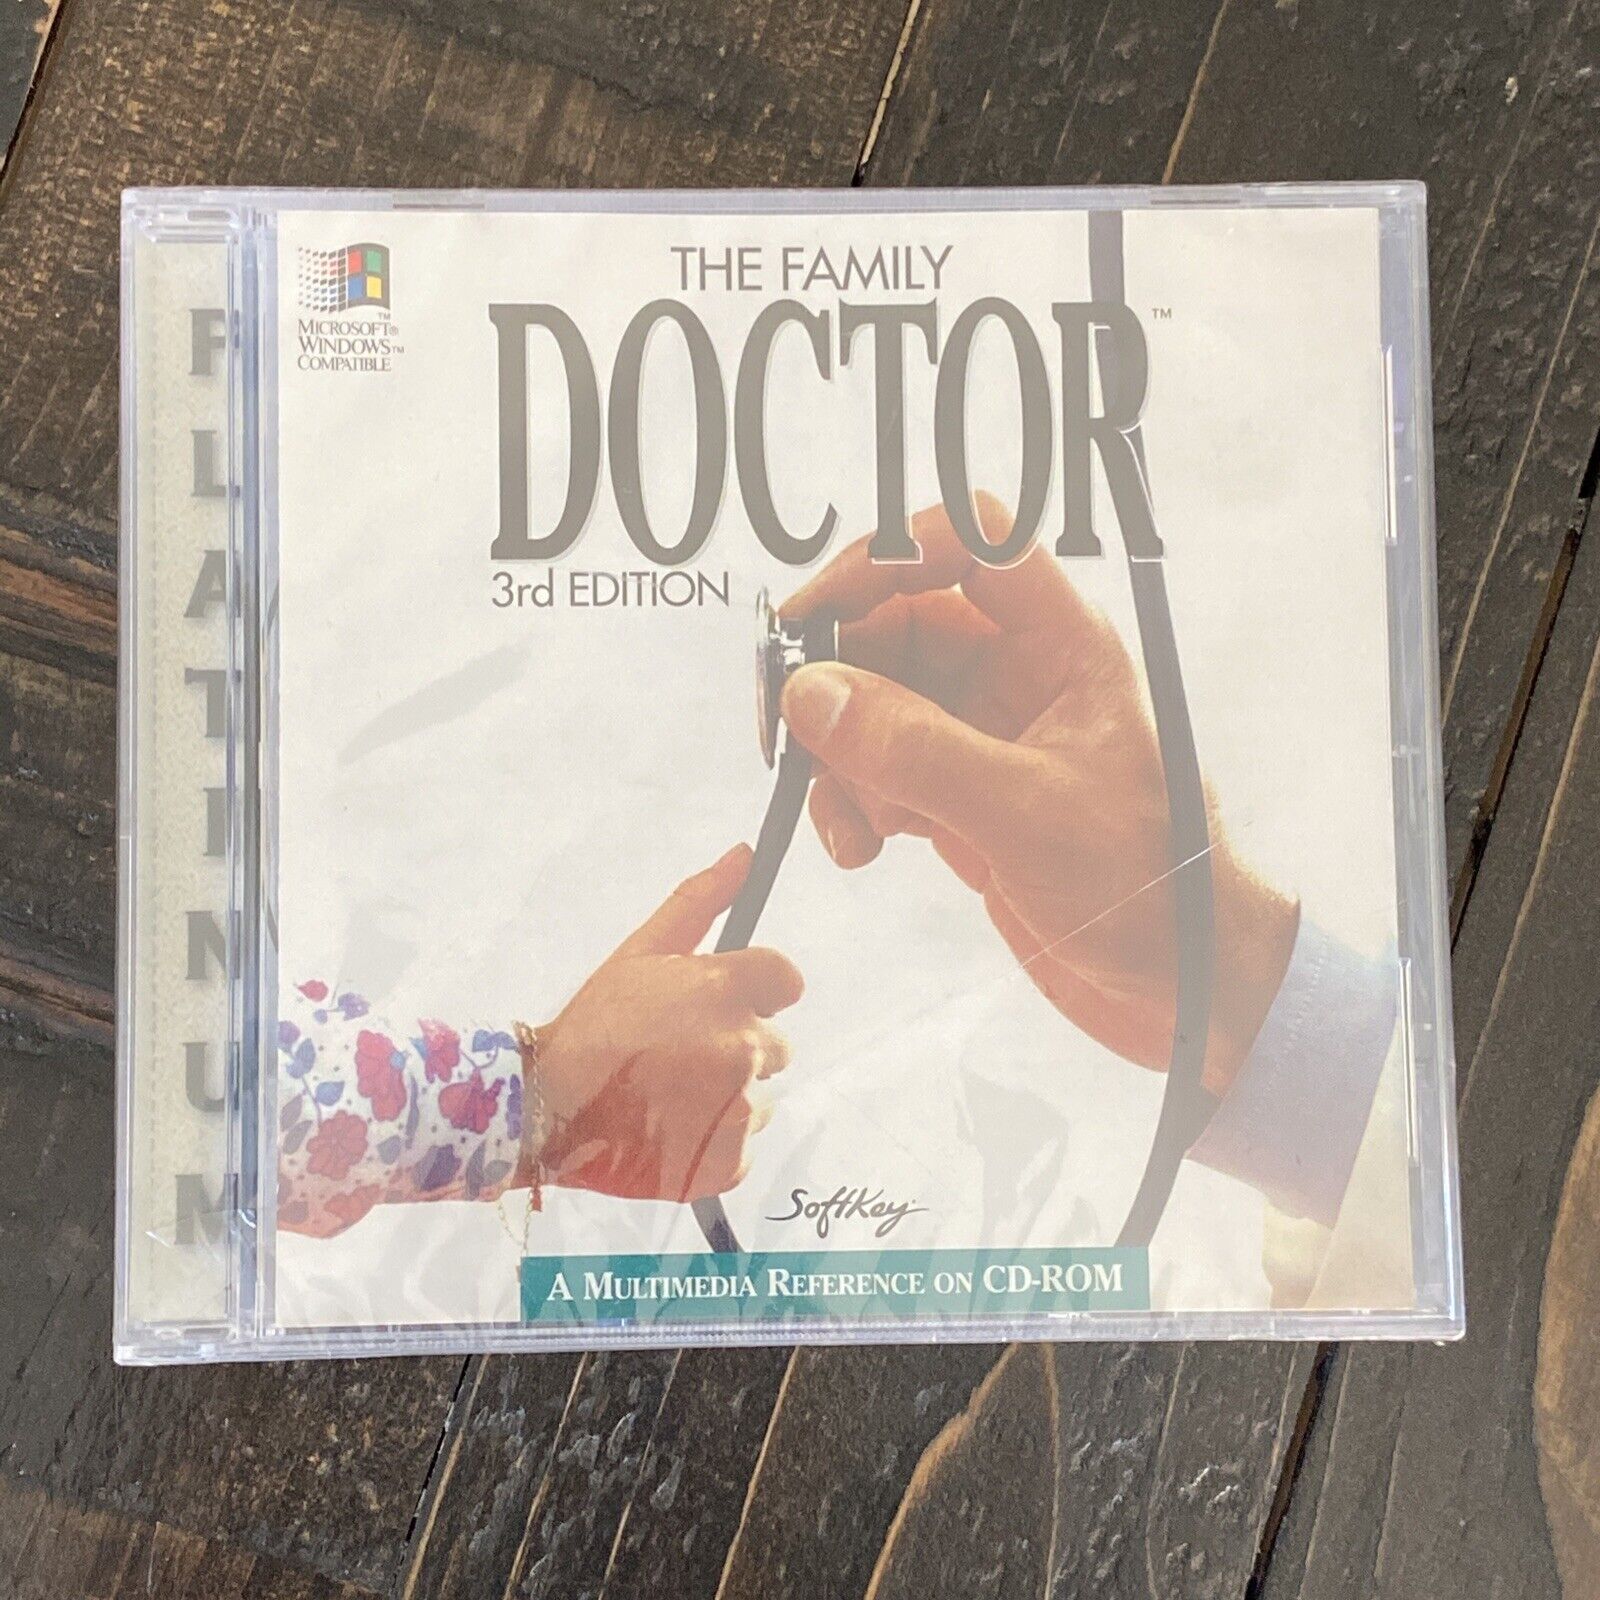 The Family Doctor 3rd Edition for Windows 3.1 and 95 (PC 1996) Reference medical